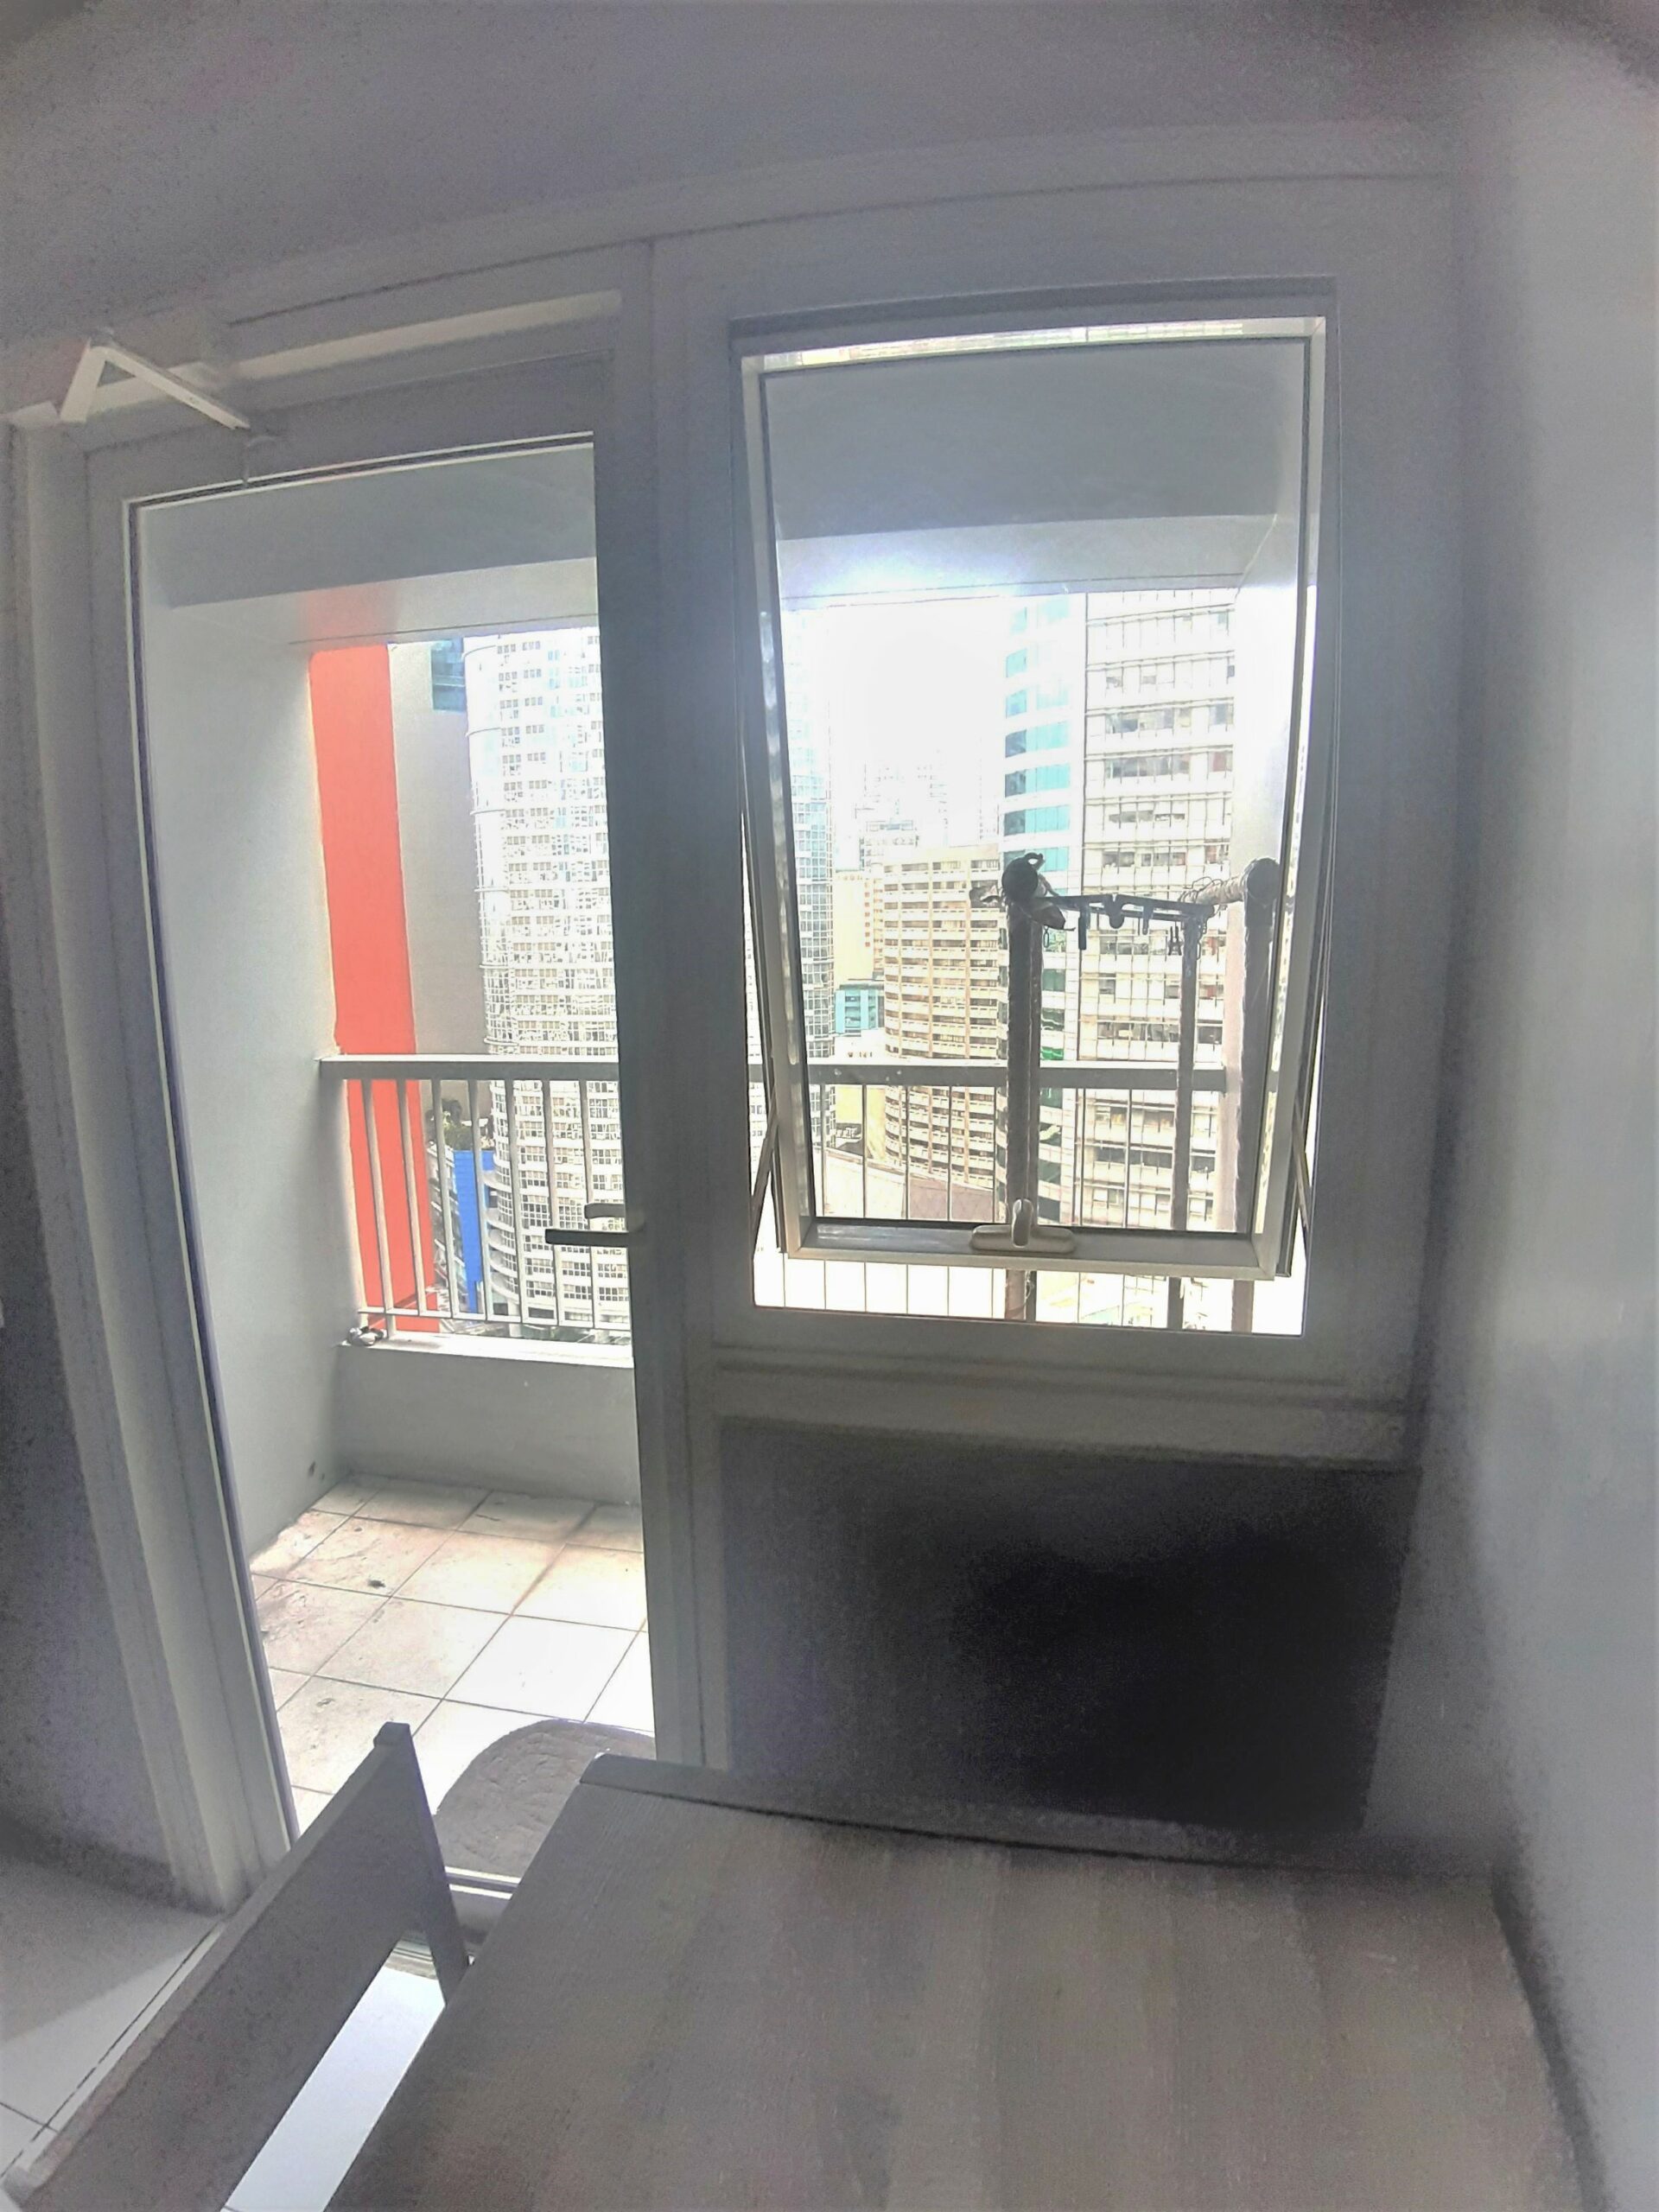 Condo Unit For Rent – 20th Floor Tower 1 at The Columns Ayala